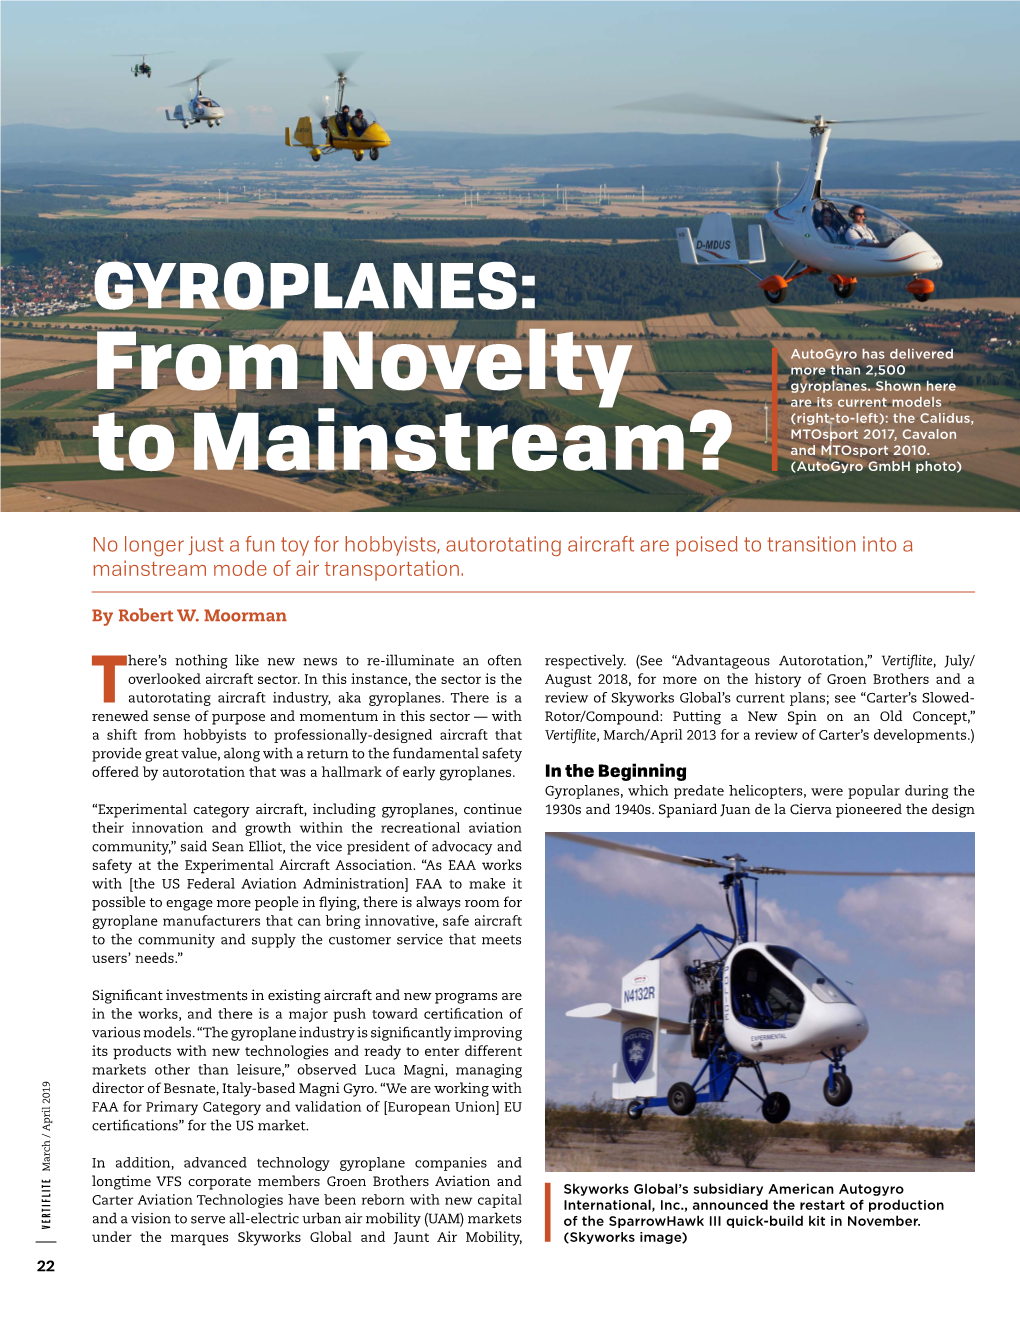 GYROPLANES: from Novelty to Mainstream?